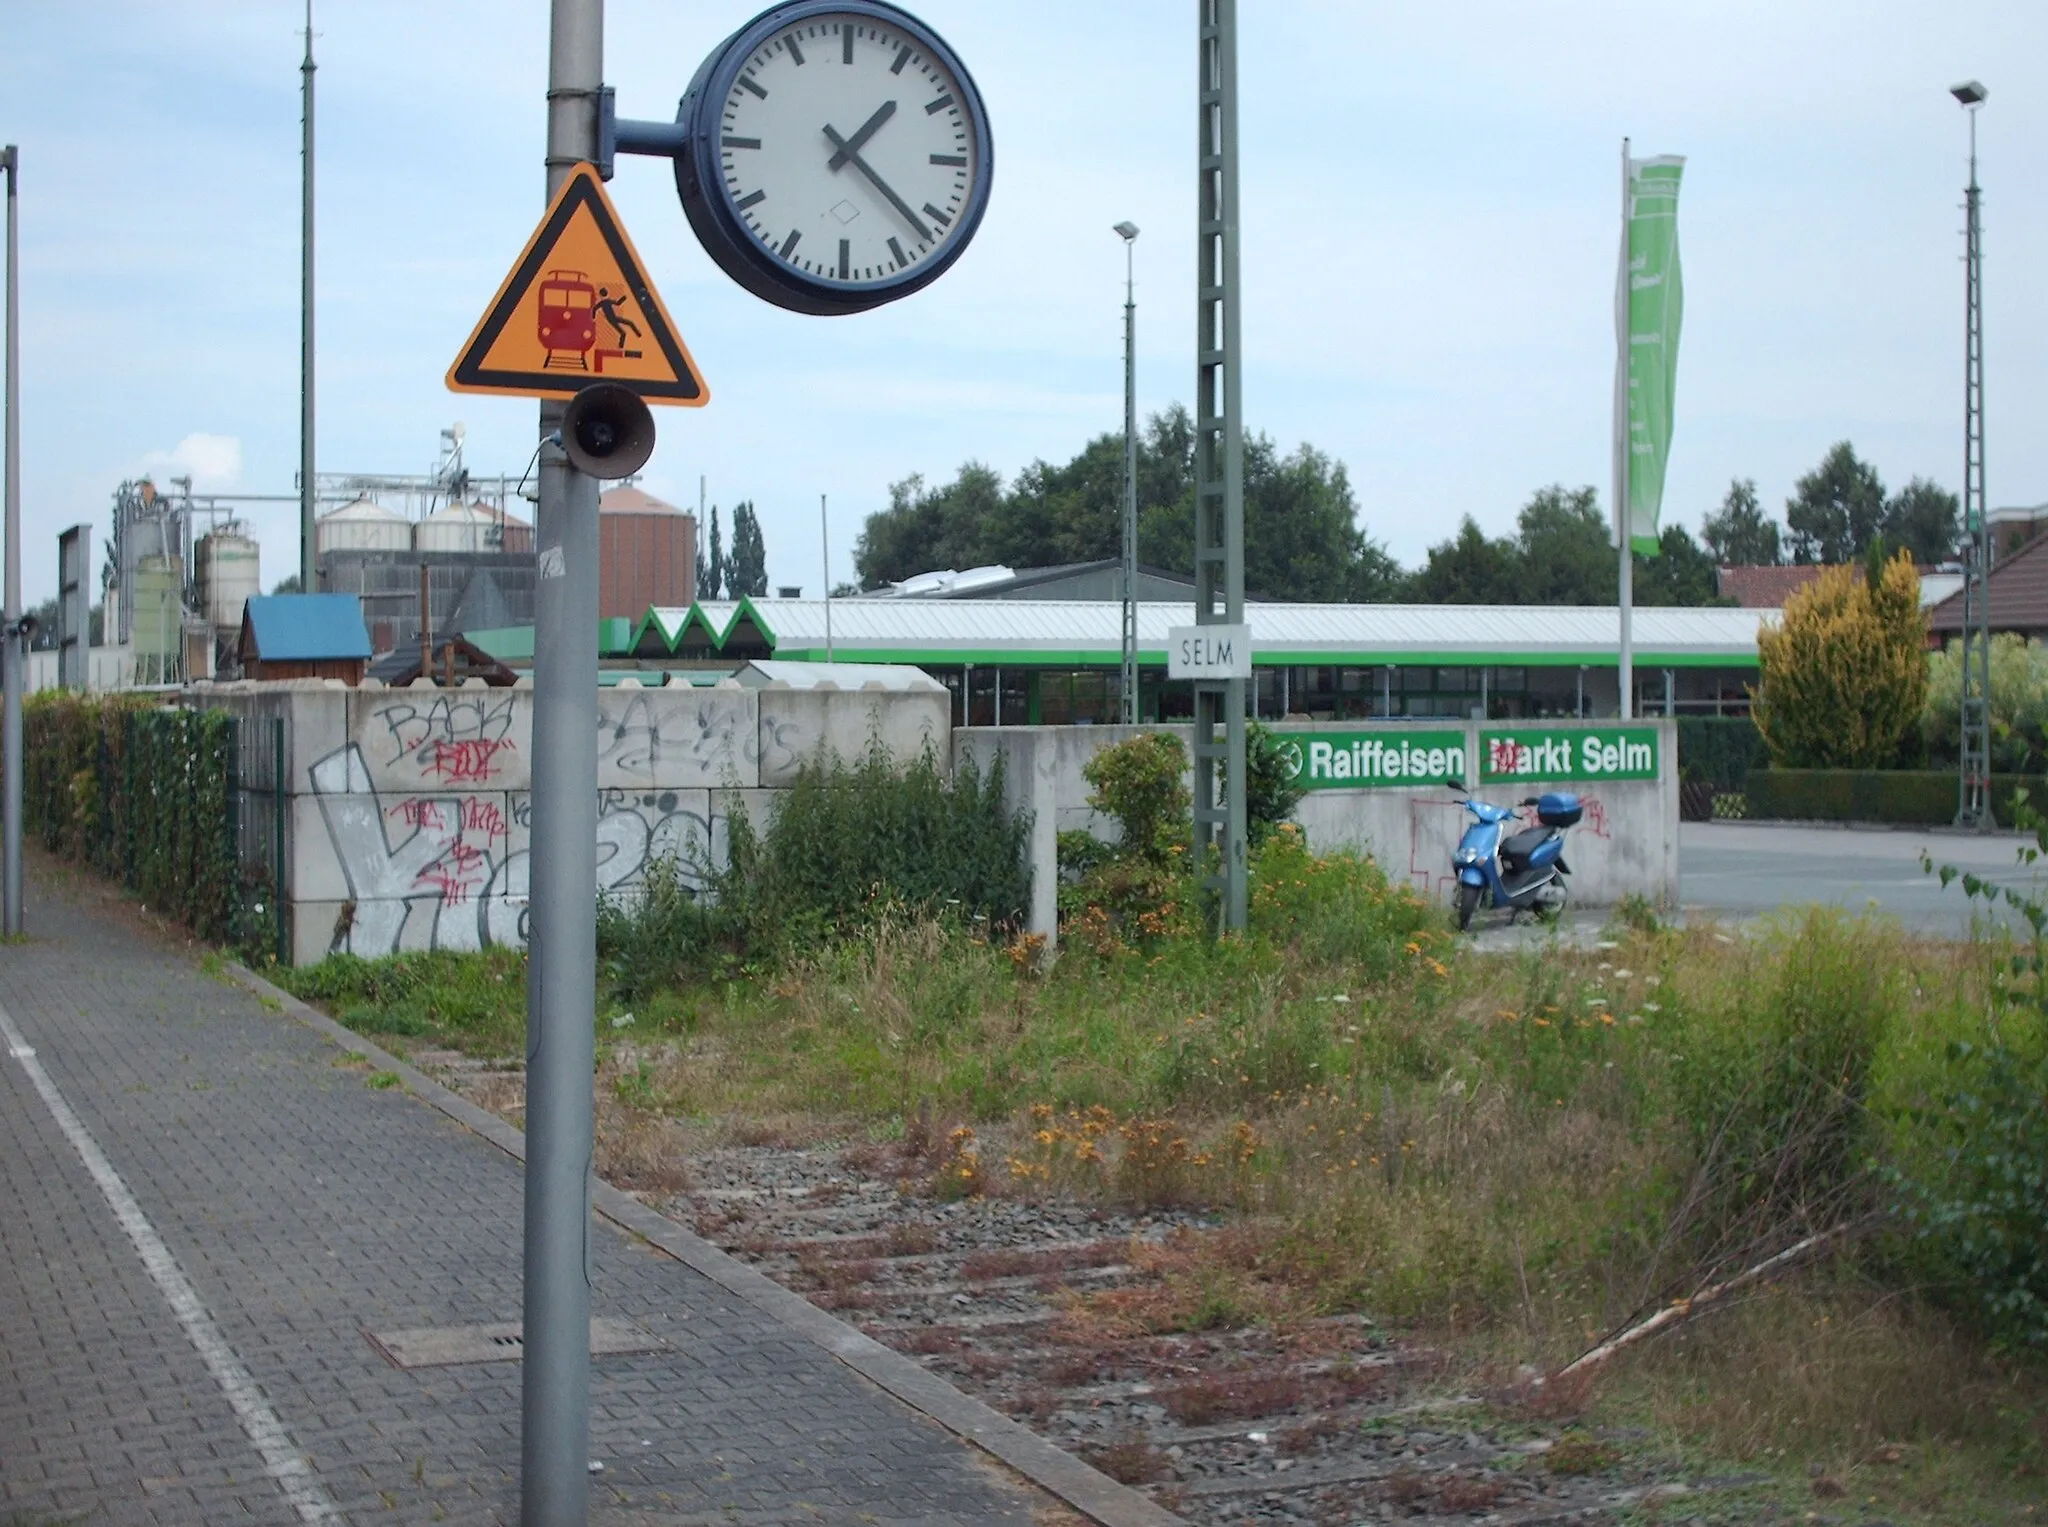 Photo showing: Selm station, Selm, Germany